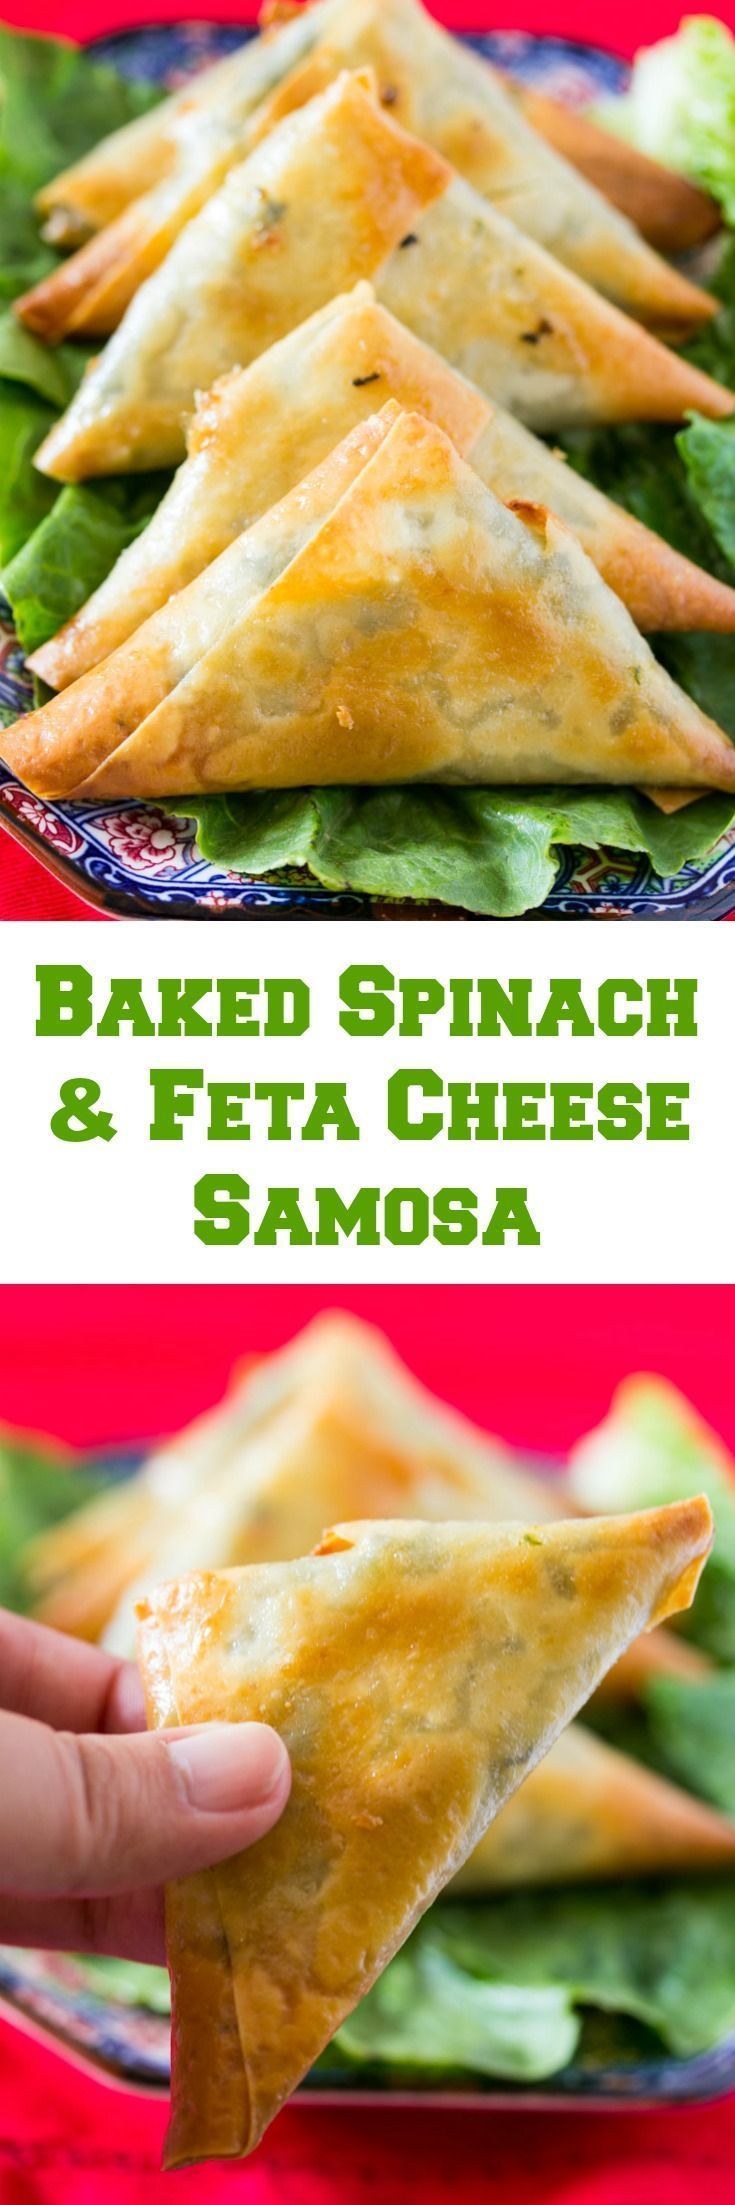 Baked spinach and feta cheese filled samosa is a great party appetizer or snack!